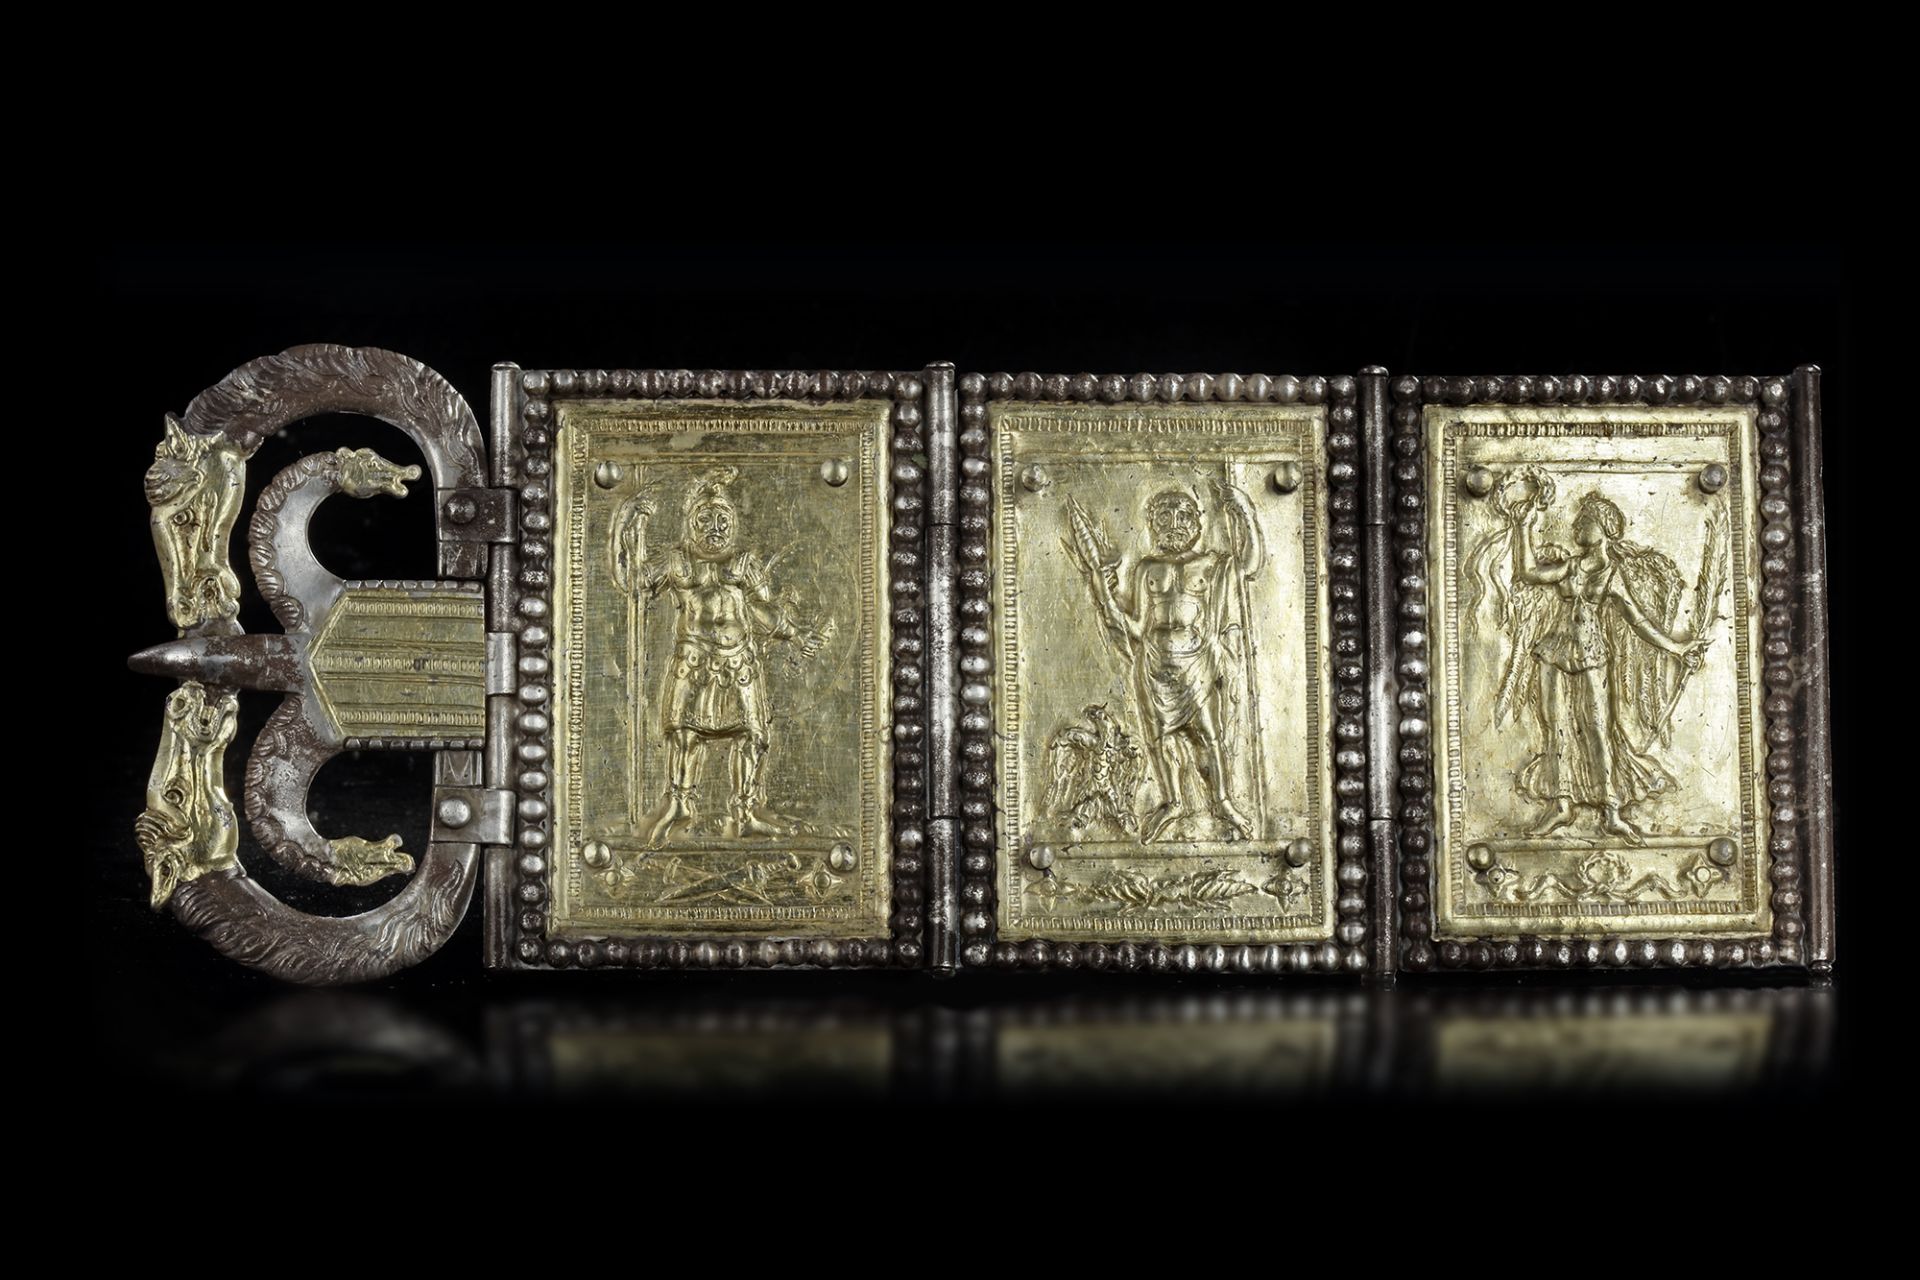 AN EXCEPTIONAL LATE ROMAN SILVER PARADE BELT FITTING WITH SILVER PARTIALLY GILT, LATE 4TH CENTURY AD